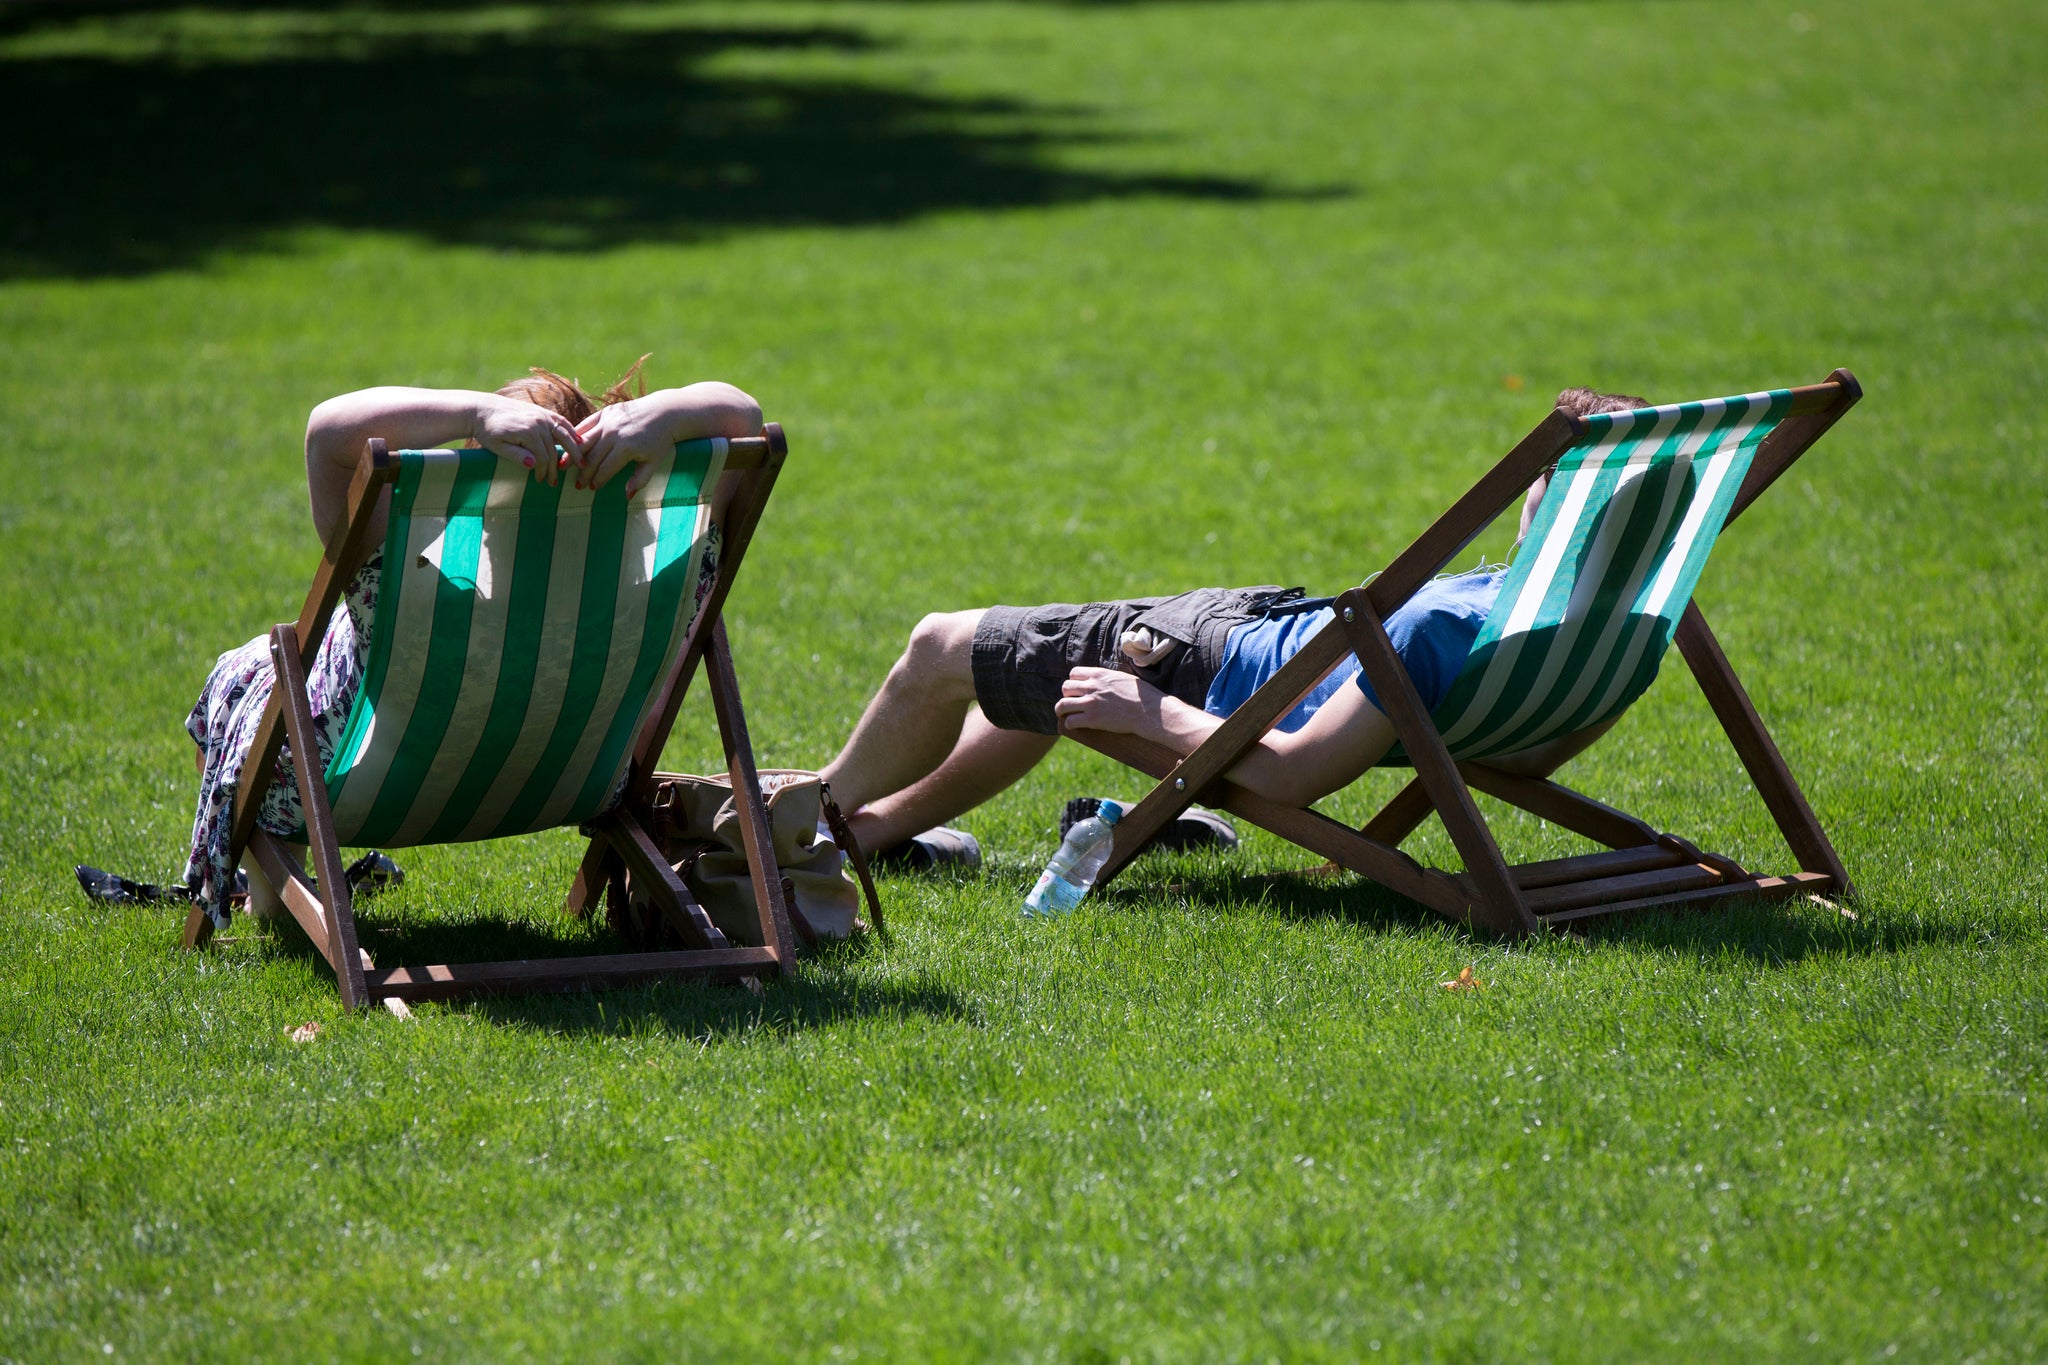 Forecasters have said that it could creep up to 30 degrees this week